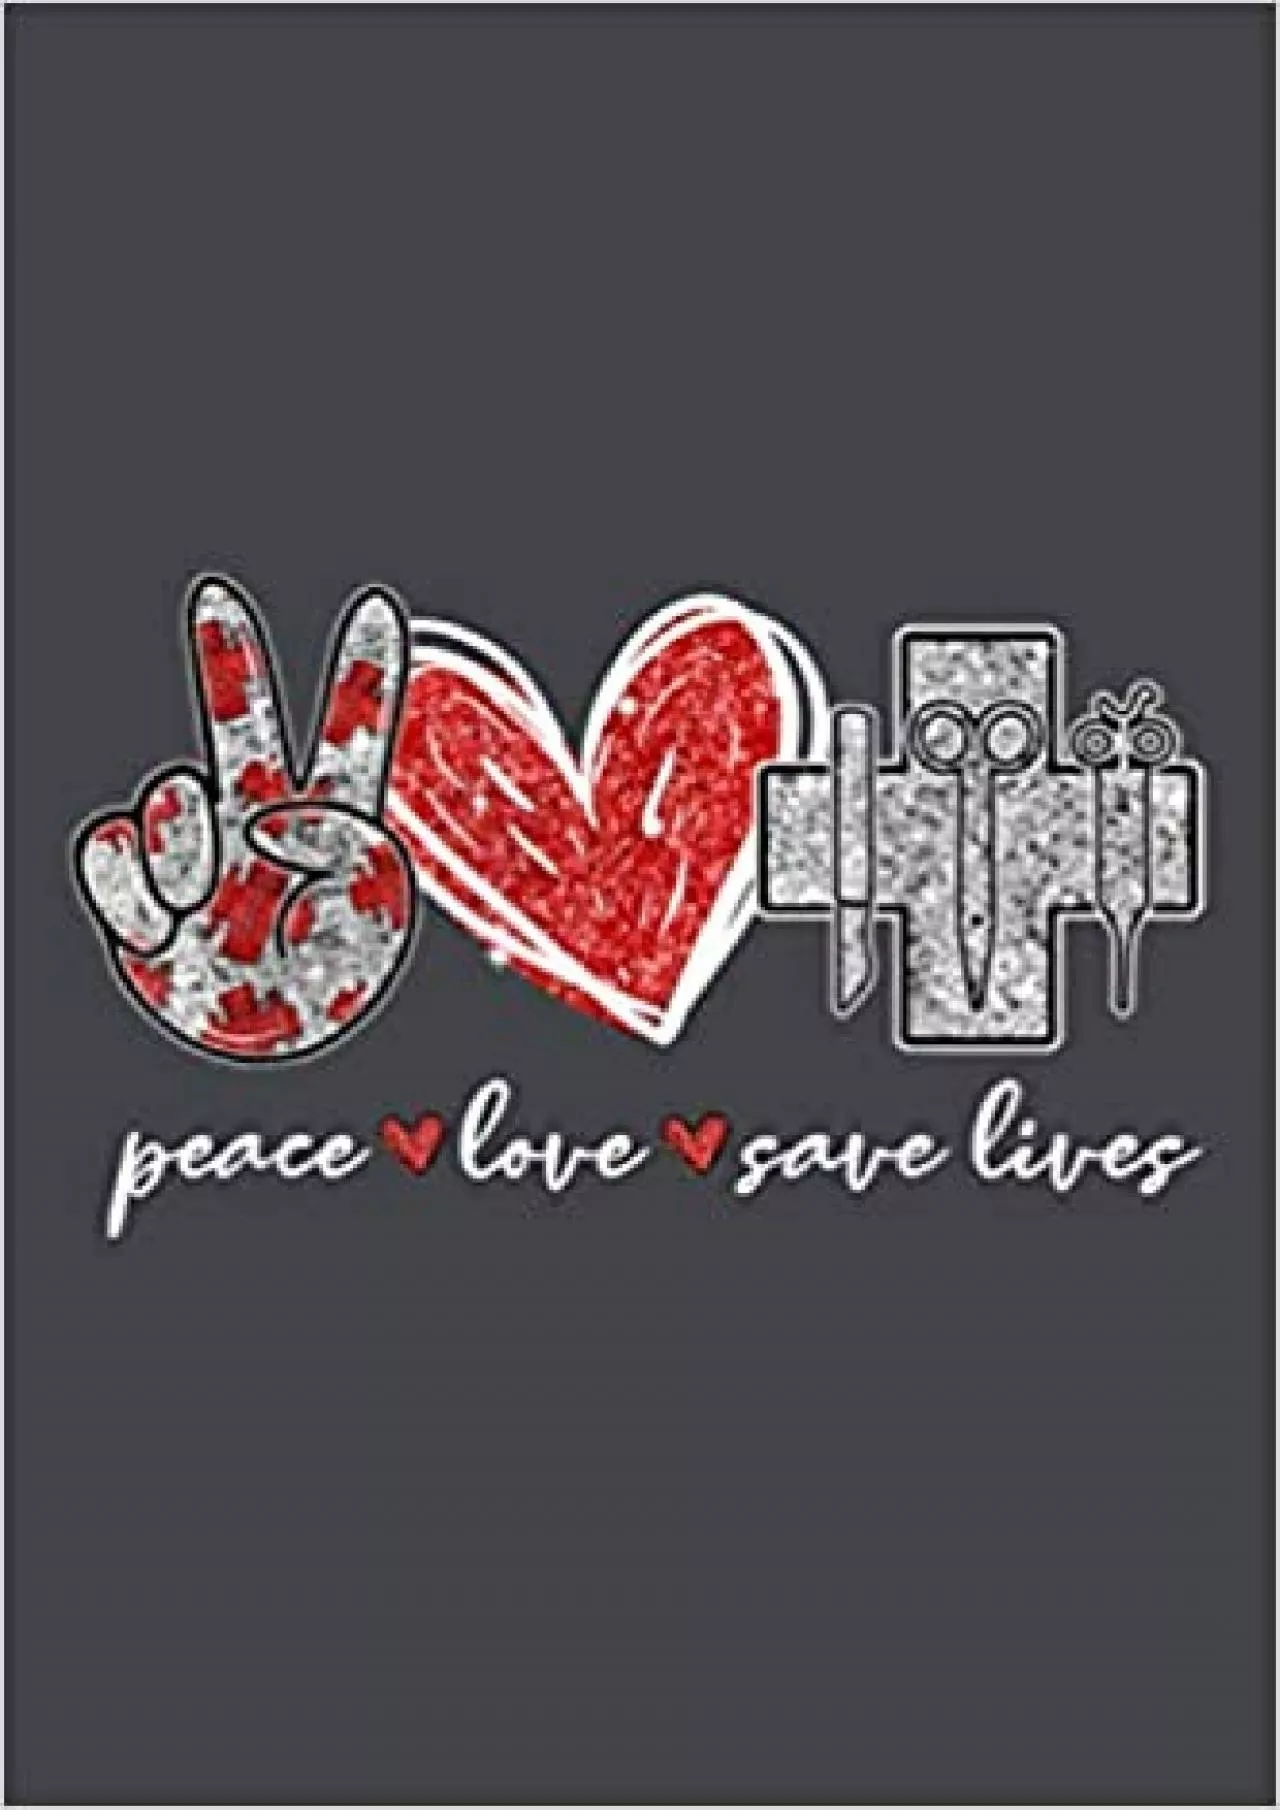 Peace Love Save Lives Cute Surgical Tech: Notebook Planner -6x9 inch Daily Planner Journal